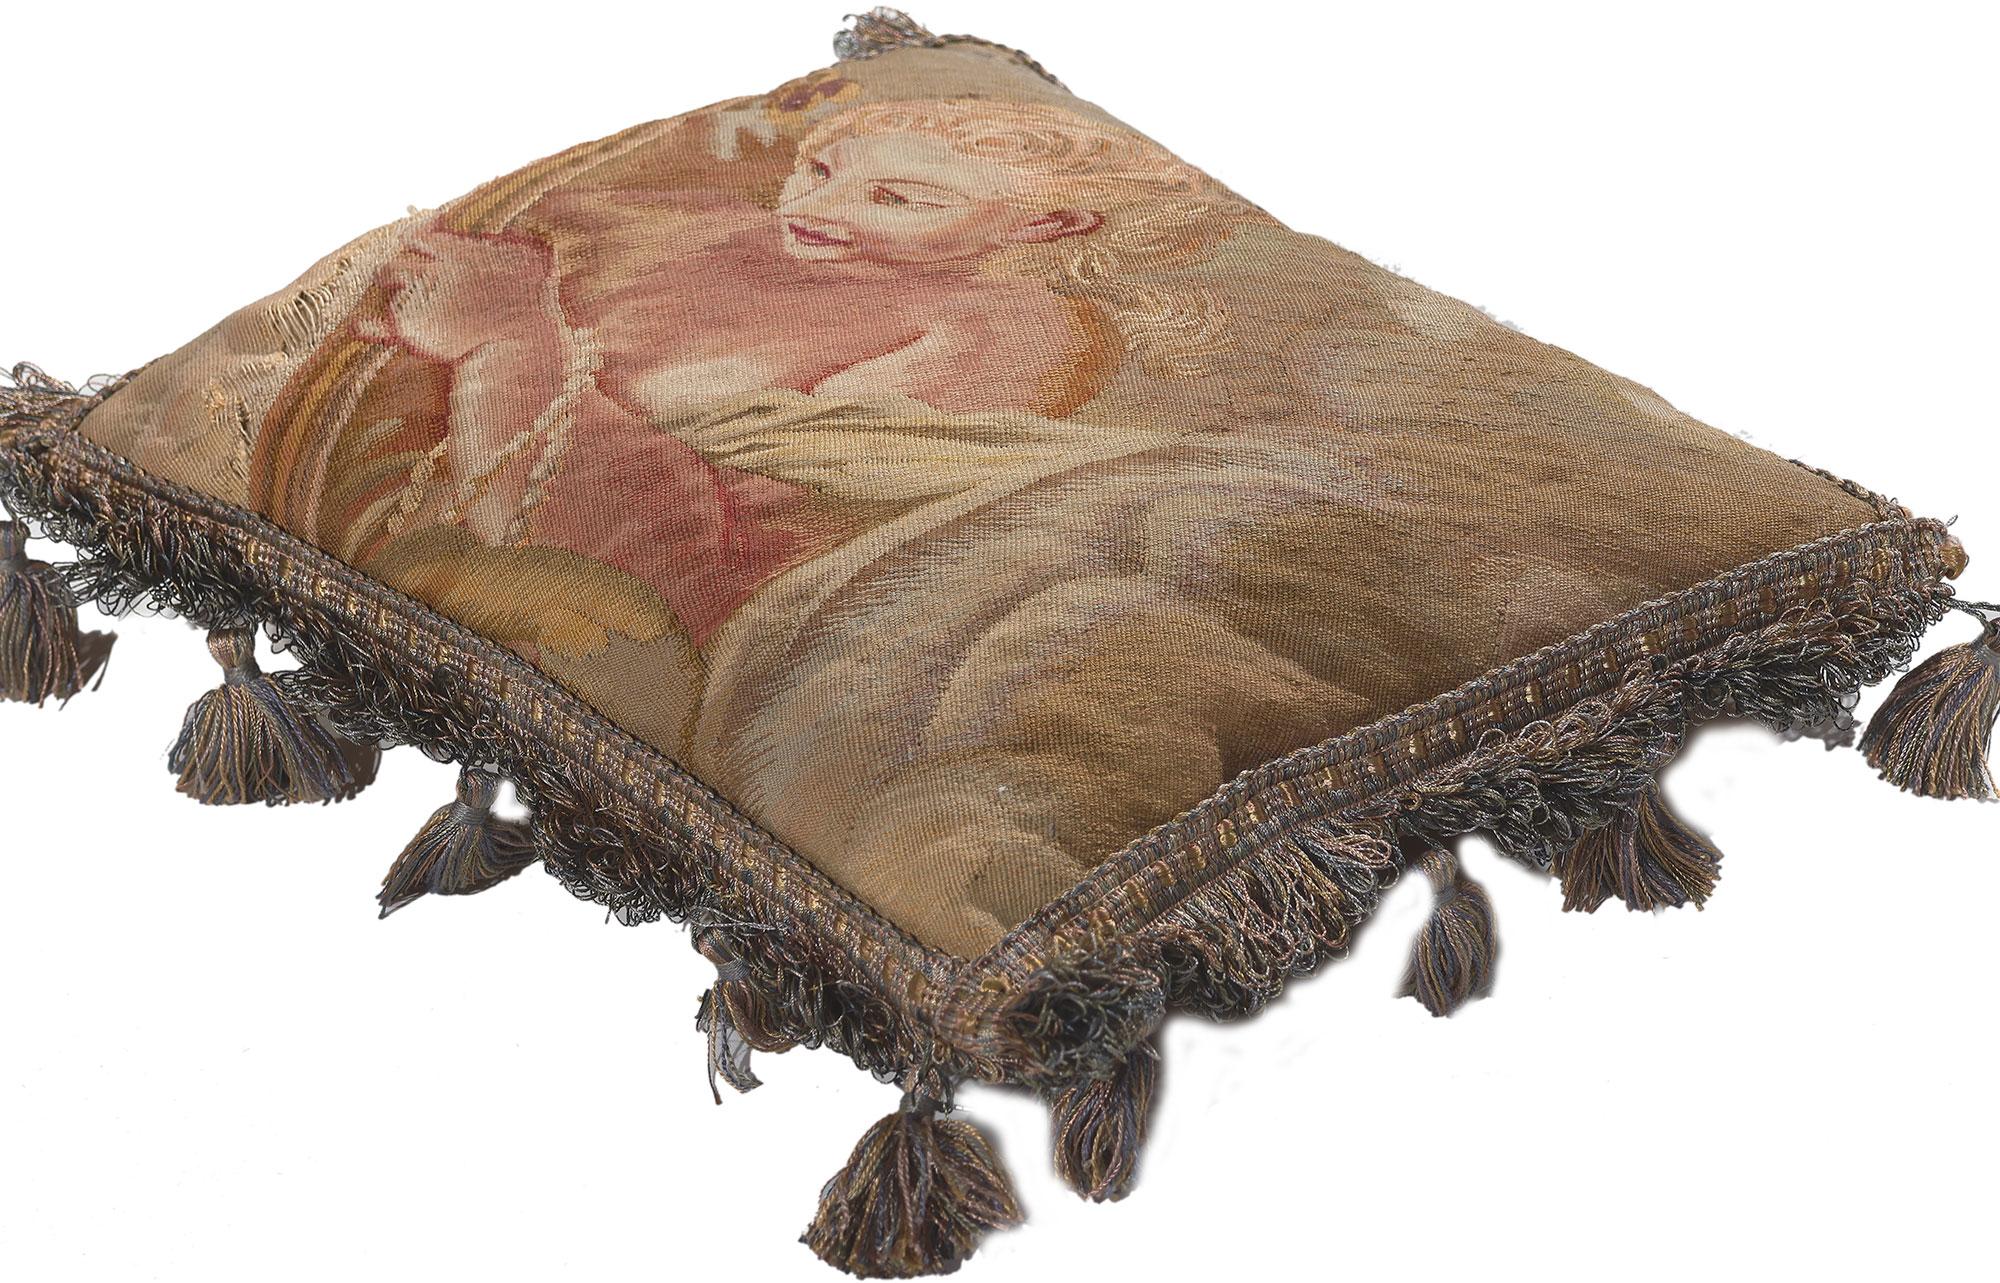 78617 Antique French Aubusson Pillow, 01'01 x 00'11. Reflecting elements of Greco-Roman mythology with meticulous details and texture, this handwoven antique French Aubusson pillow is a captivating vision of woven beauty. The visage de femme